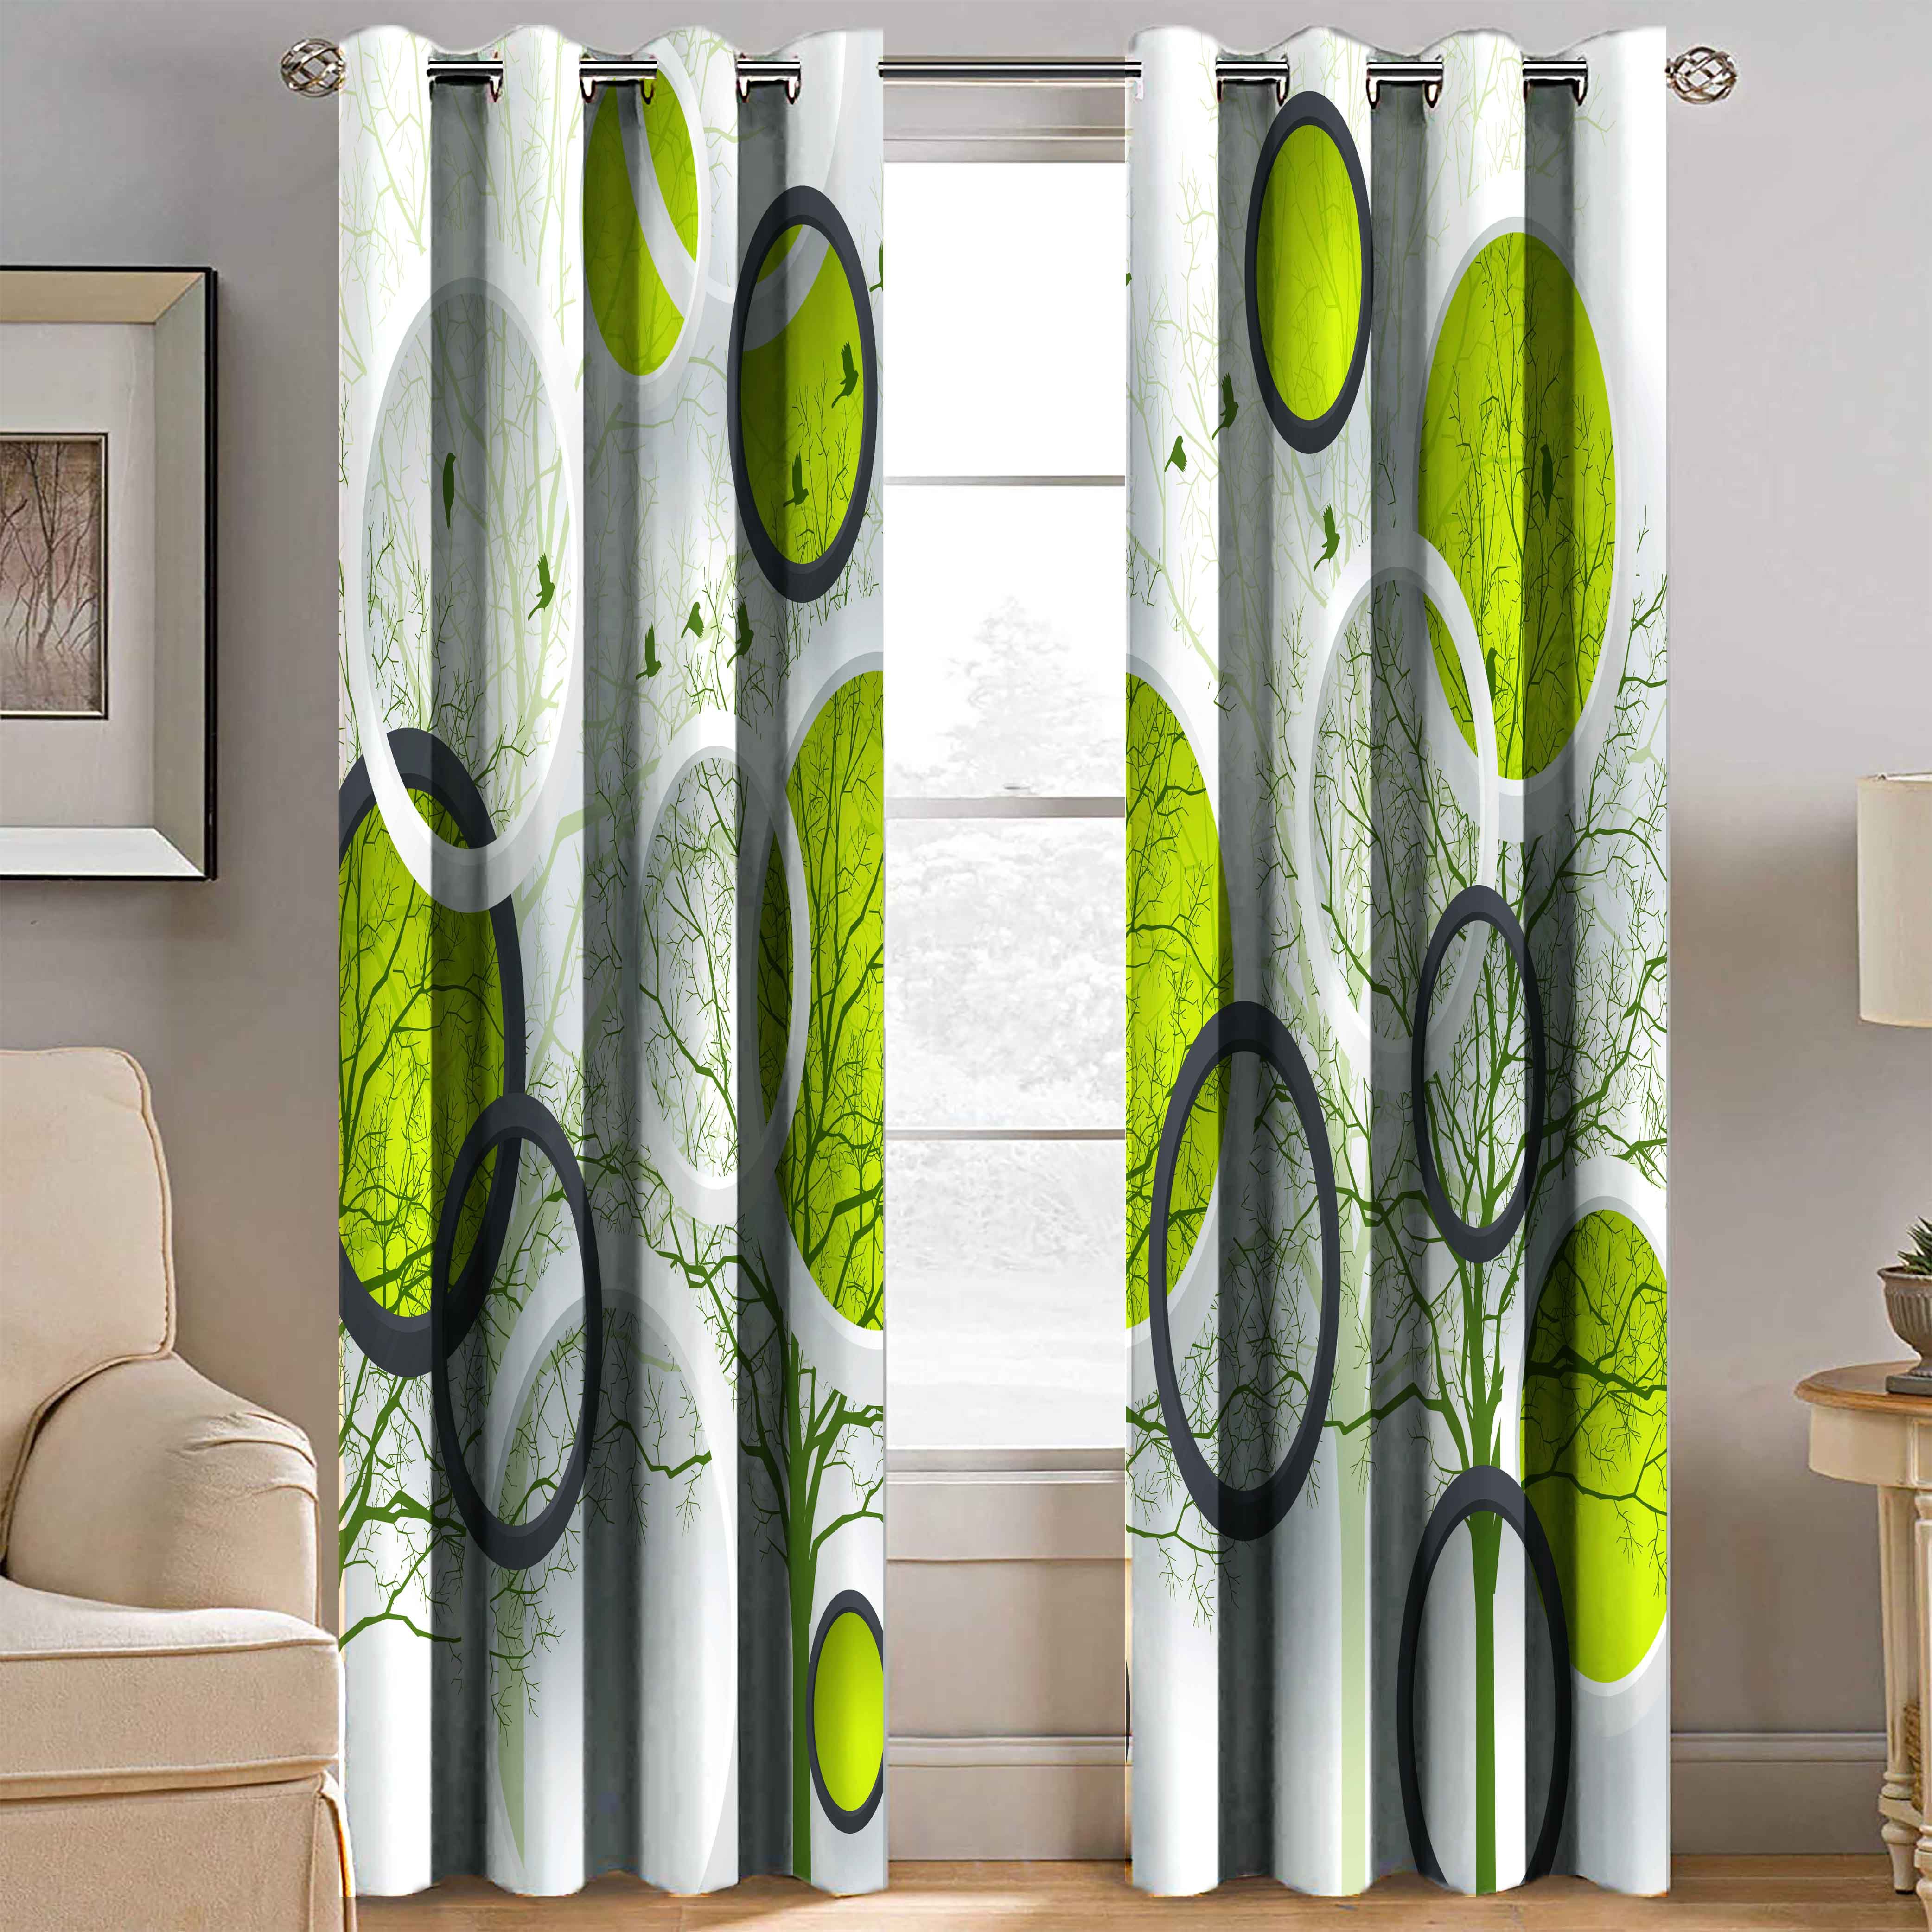     			HOMETALES Floral Semi-Transparent Curtain 5 ft Pack of 2 Multi Color